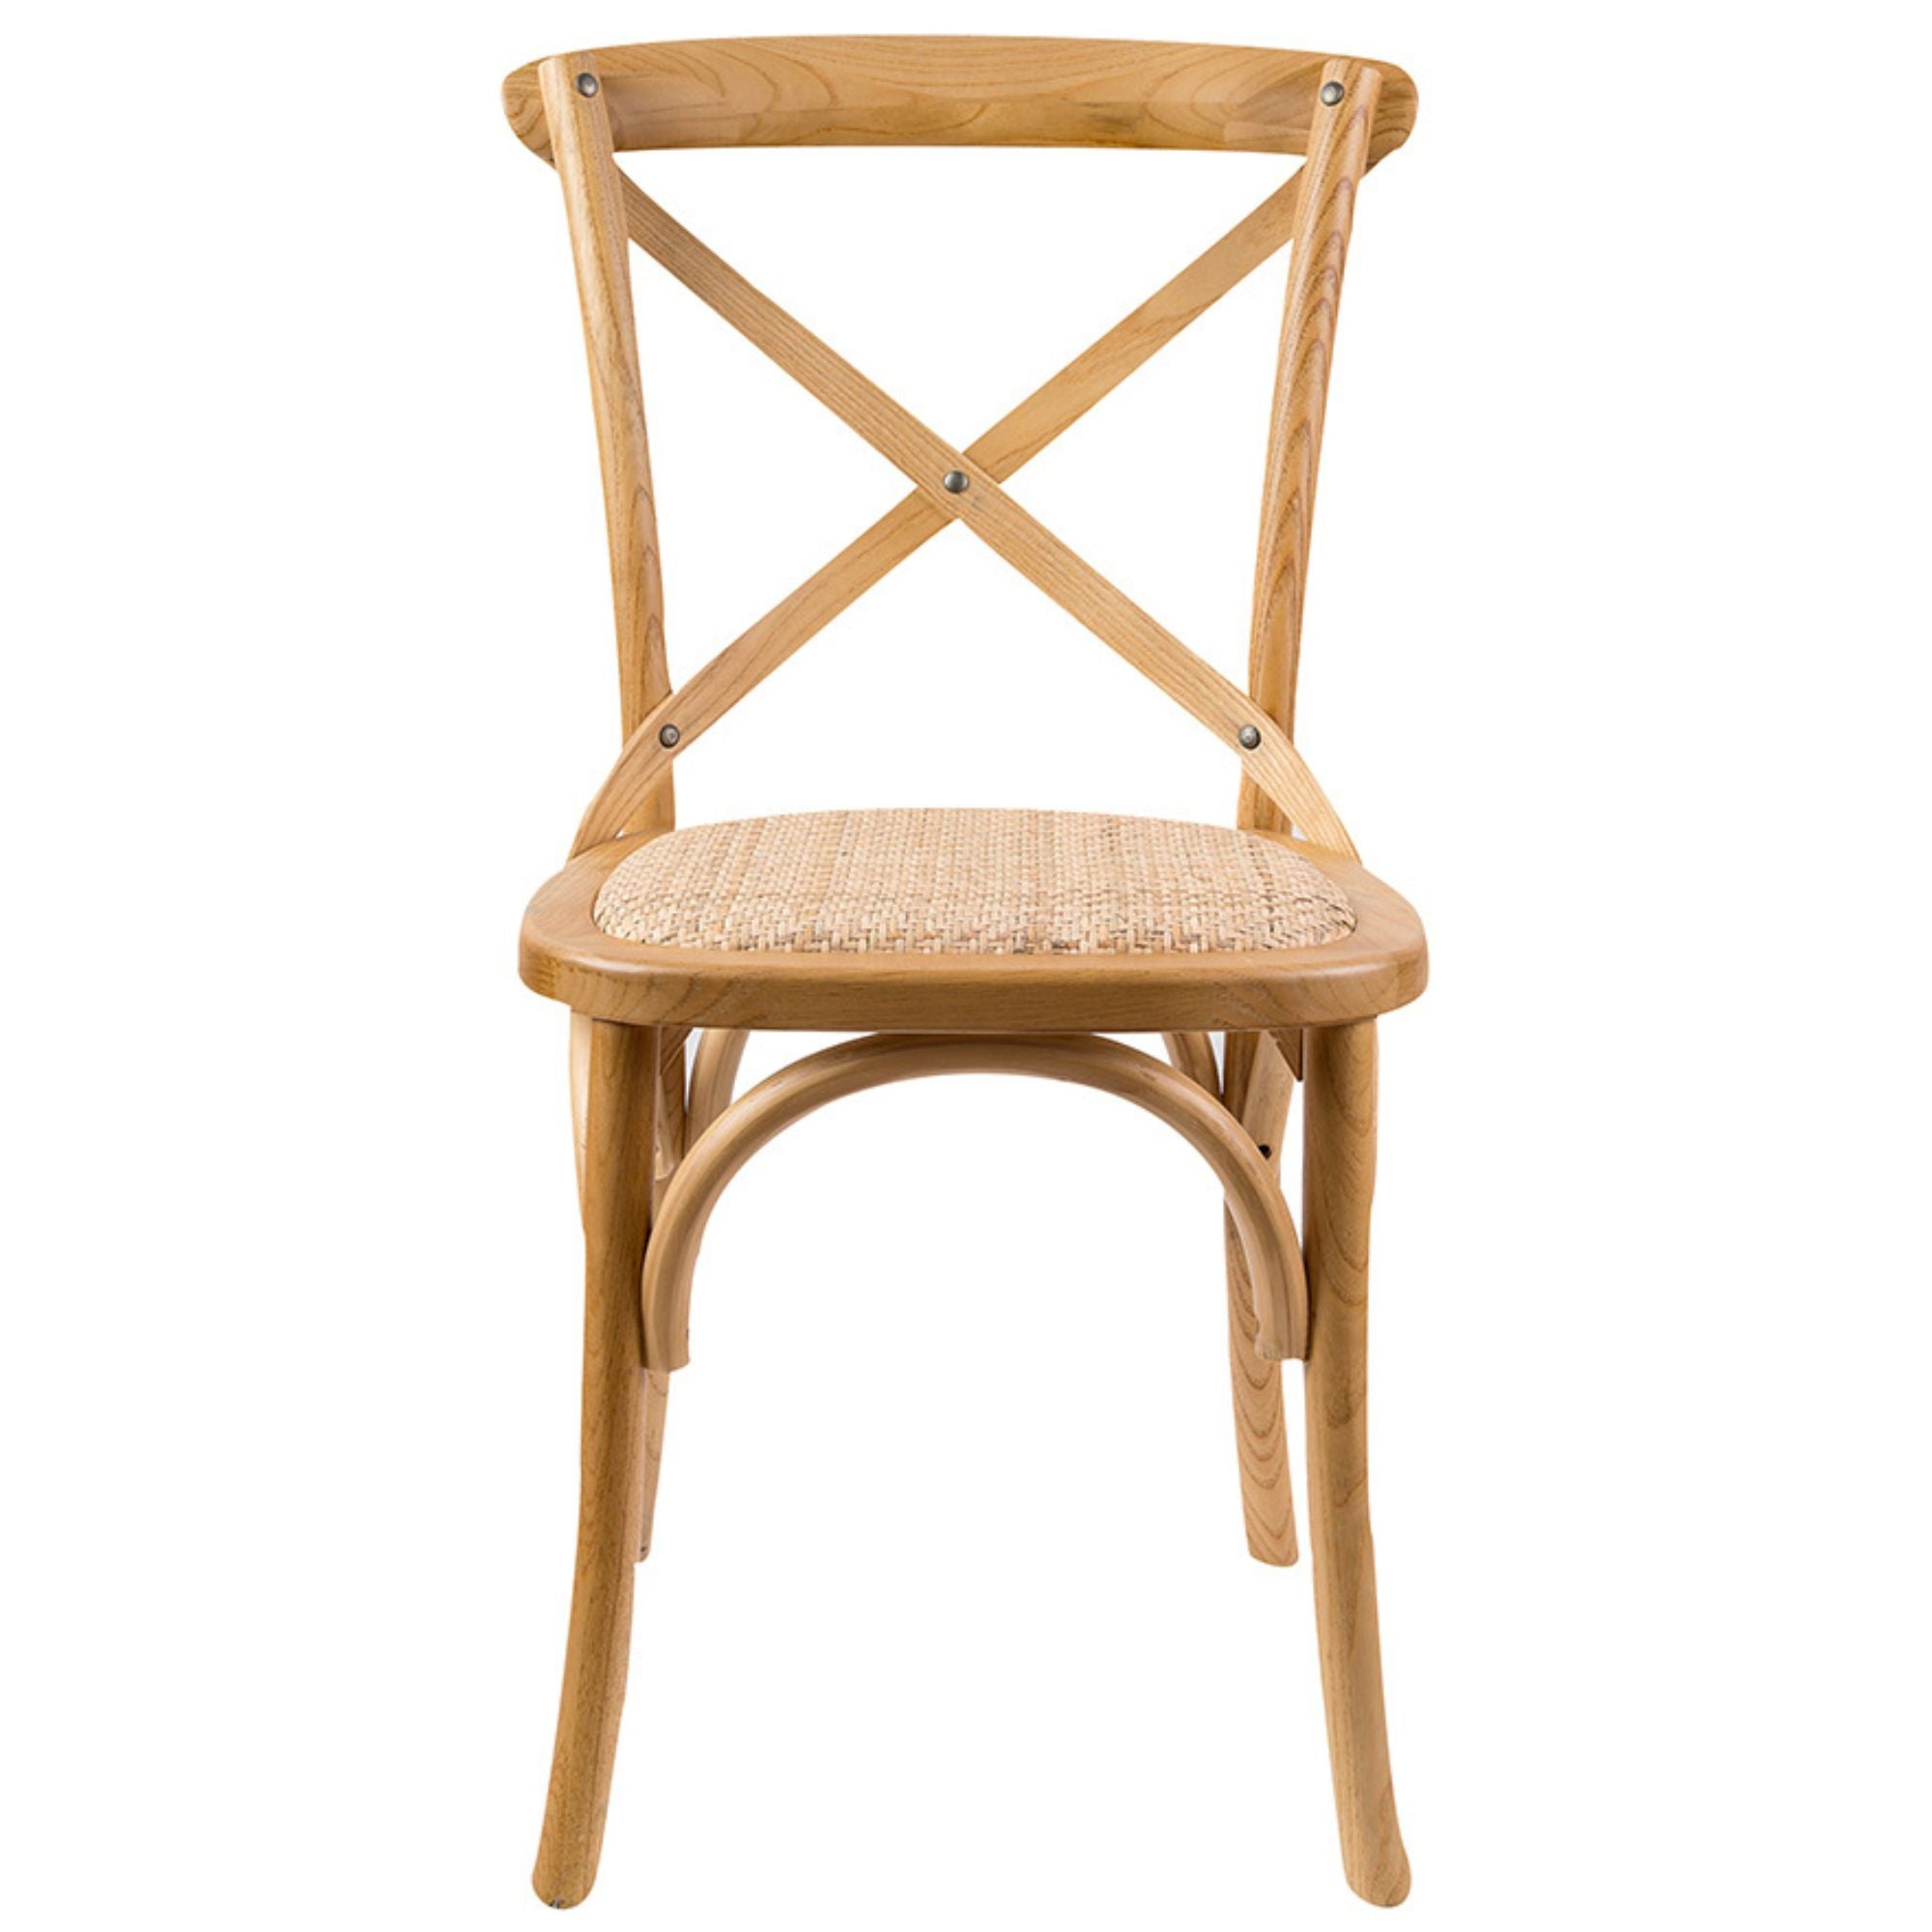 Crossback Dining Chair Set Of 8 Solid Birch Timber Wood Ratan Seat - Oak